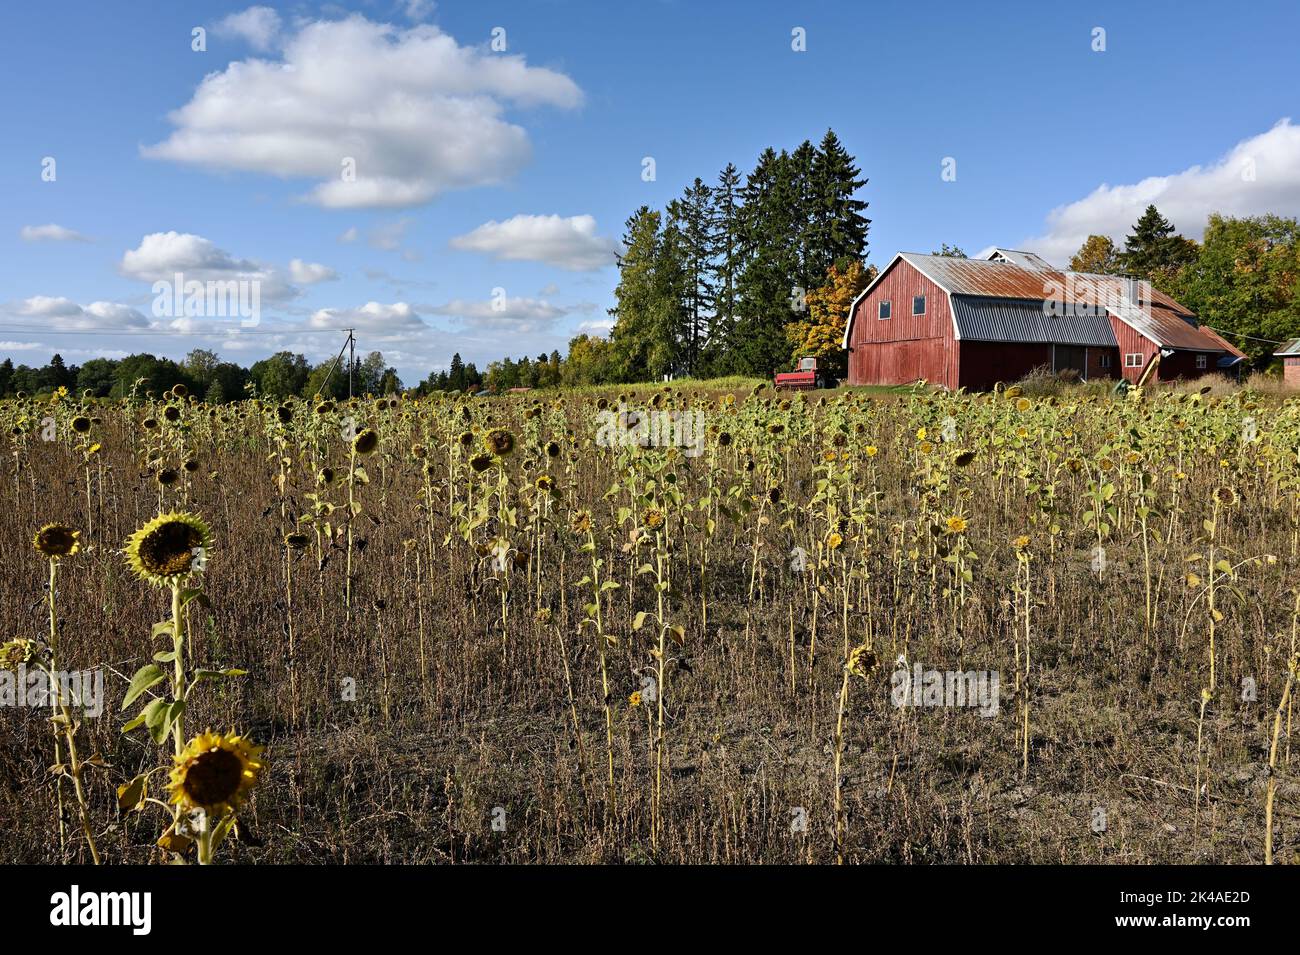 sunflower field, red barn and tractor on the farm Stock Photo